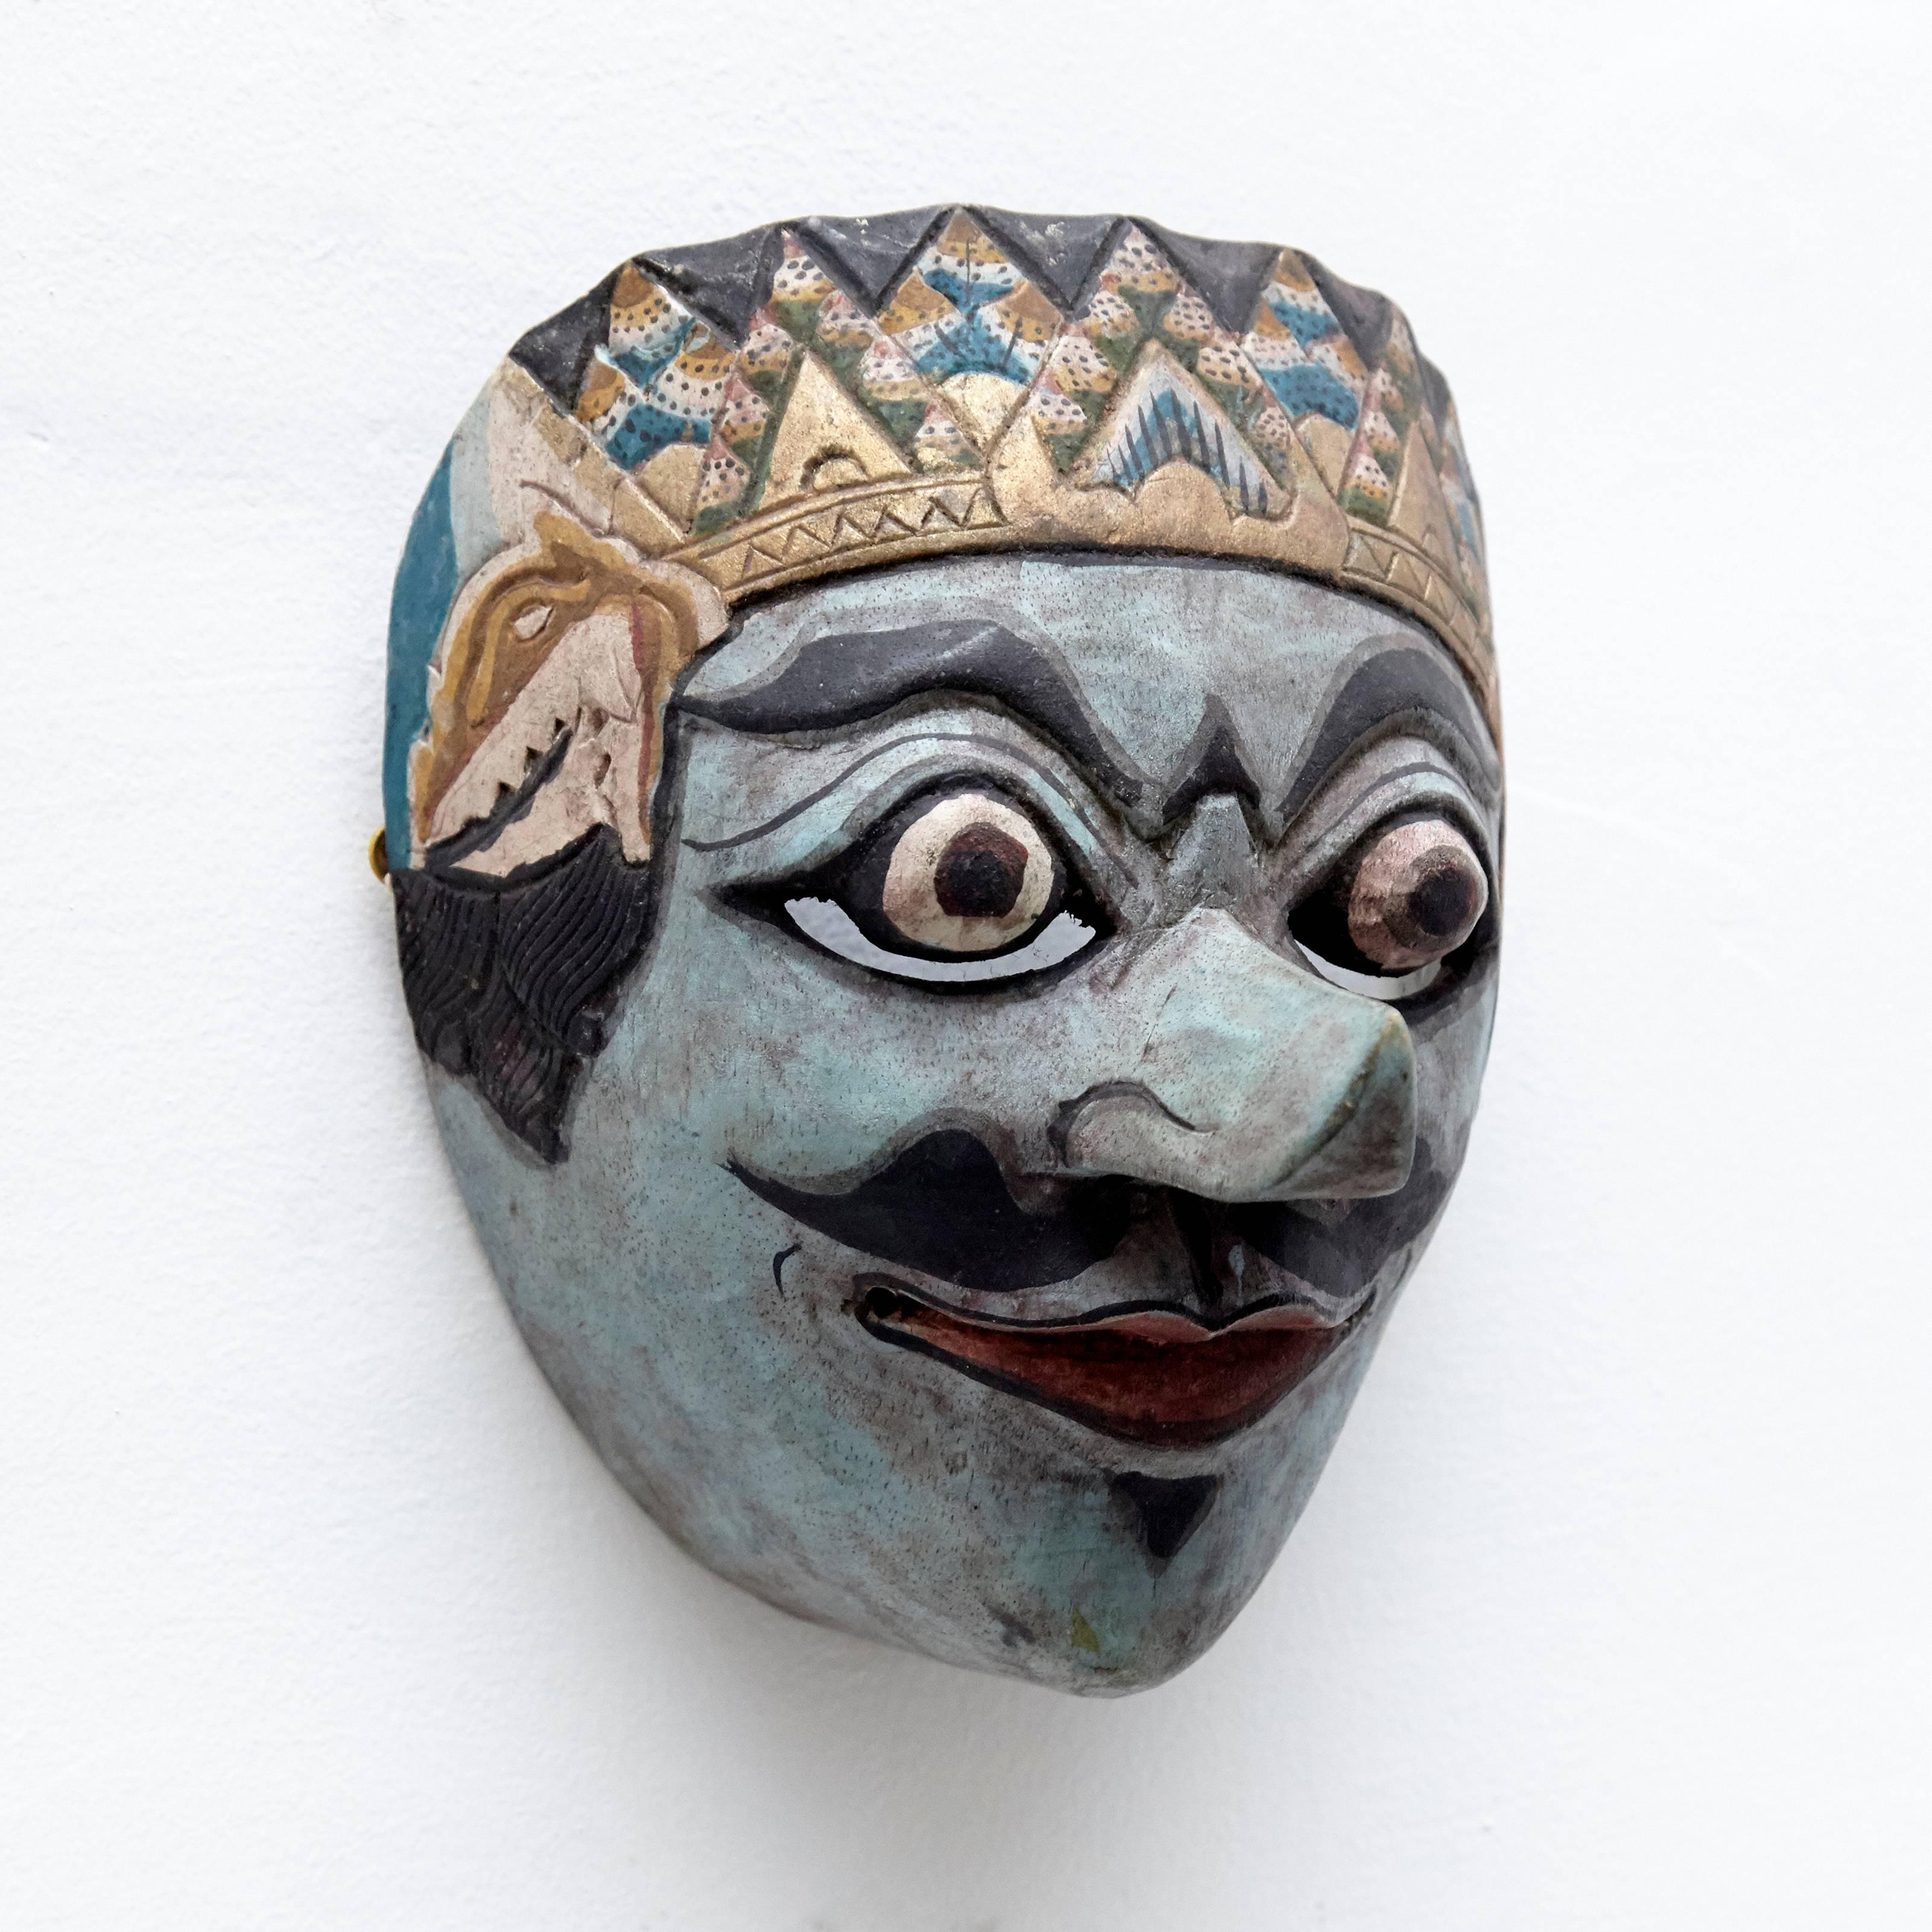 Traditional mask from Southeast of Asia, dated circa 20th century.

Craved wood and painted by hand.

In good condition, with wear consistent with age and use, preserving a beautiful patina with some scratches and hits.